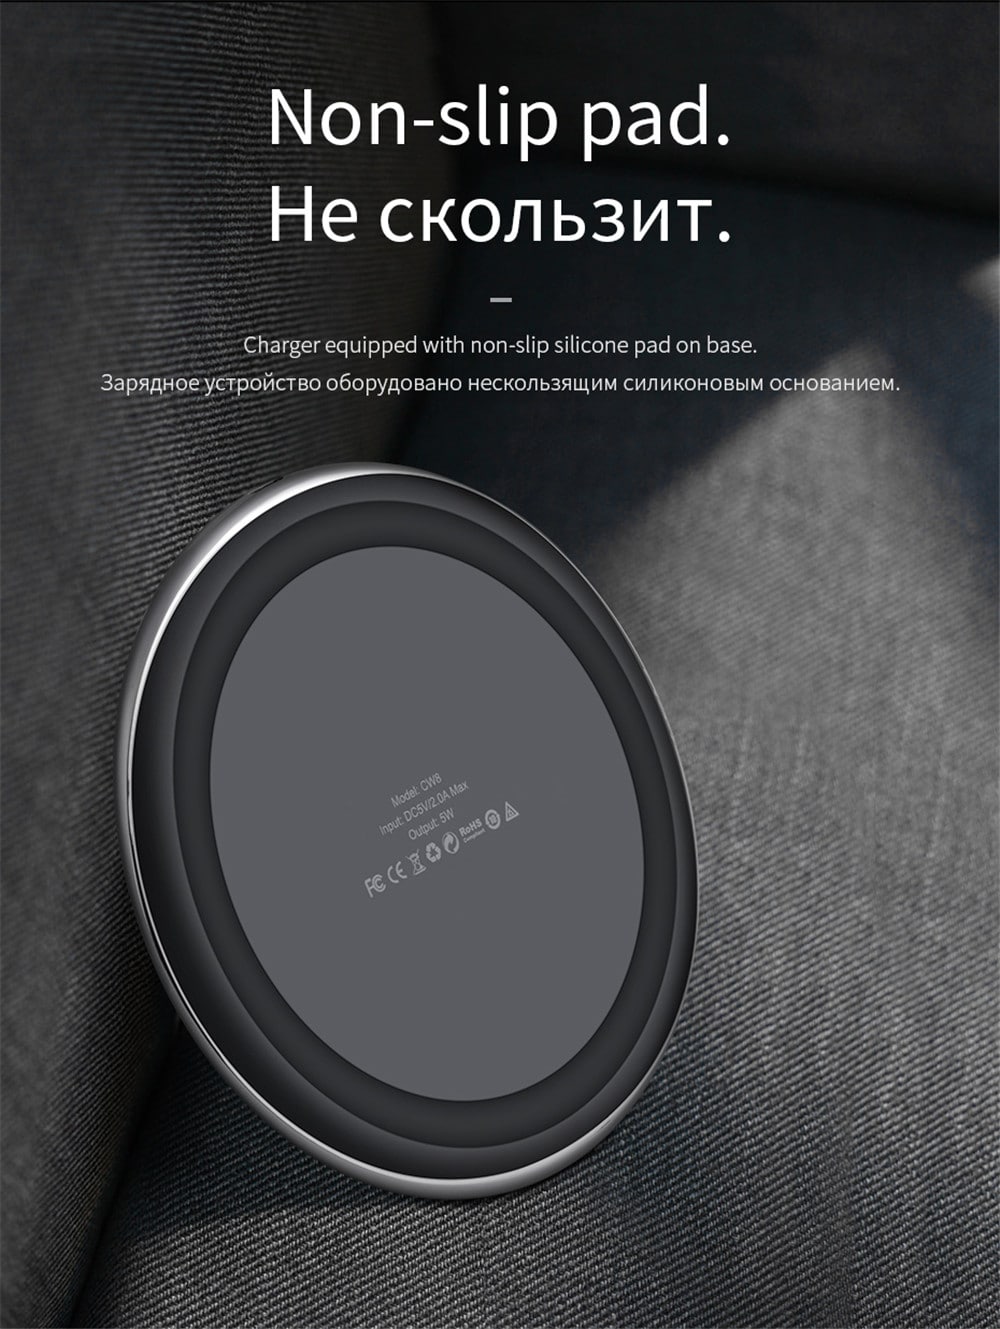 Qi Wireless Charger 5V1A Desktop Wireless Fast Charging Pad For iPhone X / 8 / 8 Plus Samsung Galaxy S8 / S8 + / Note 8- Black